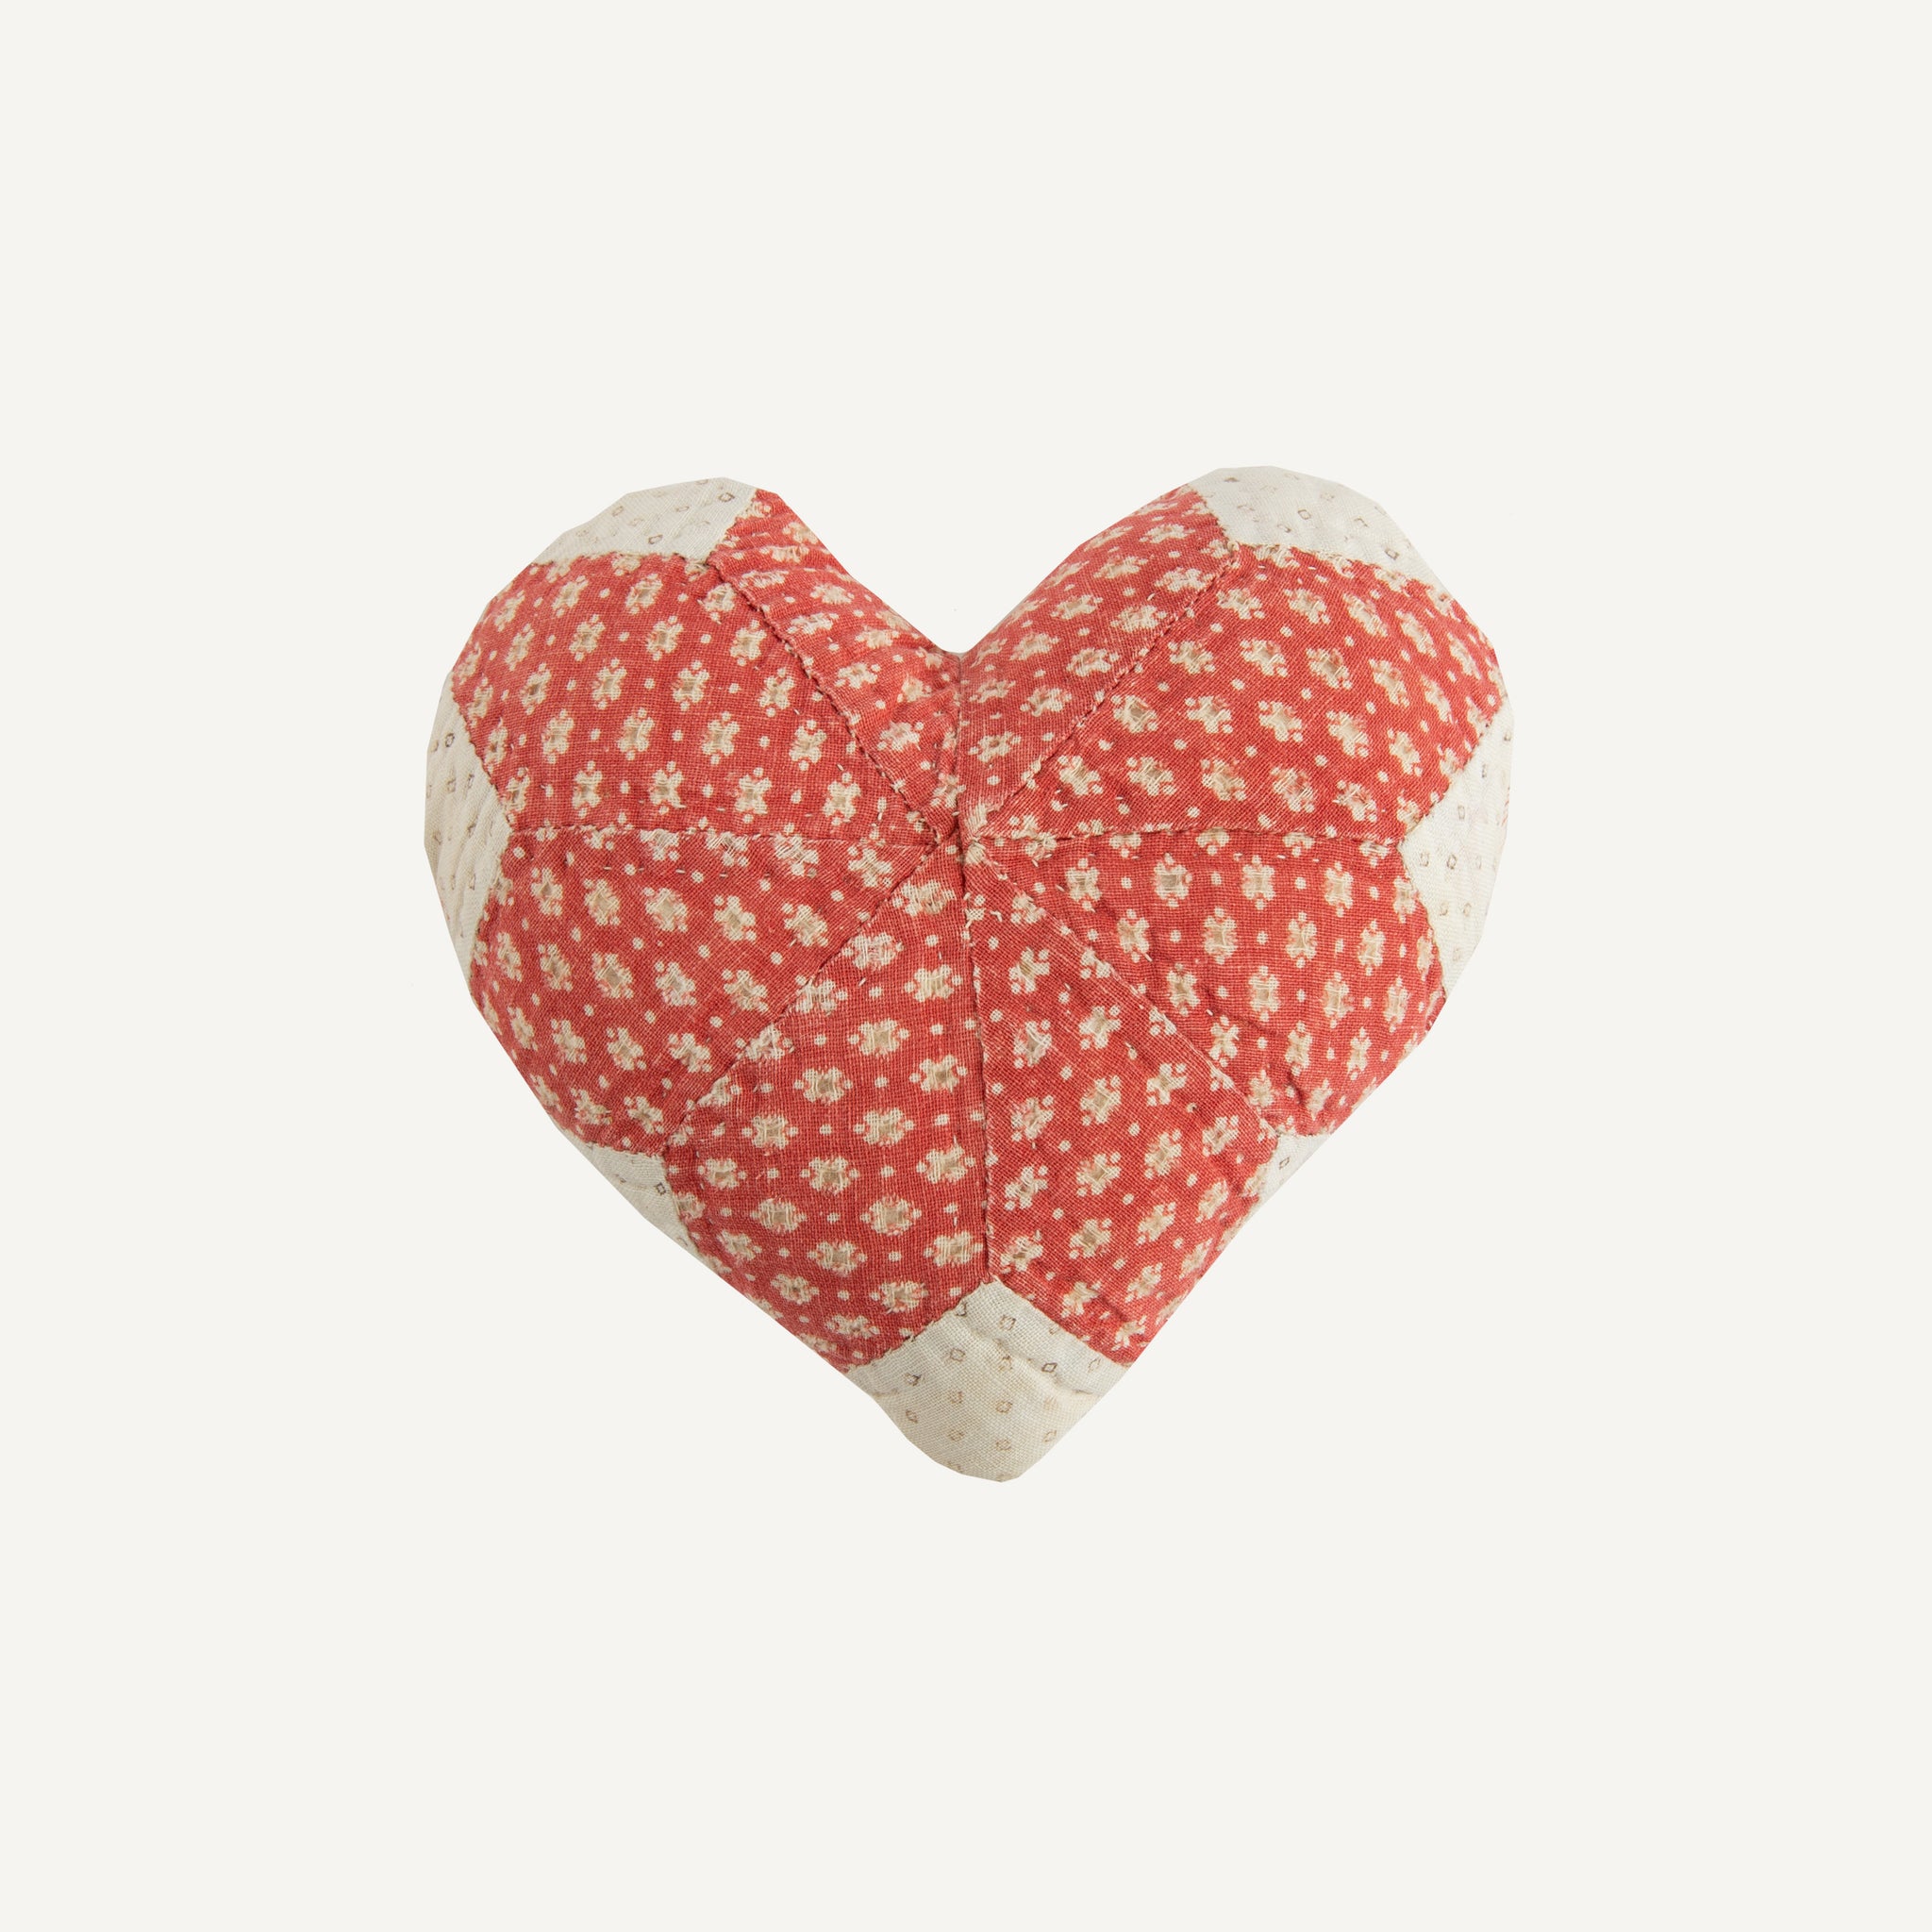 ANTIQUE QUILTED HEART